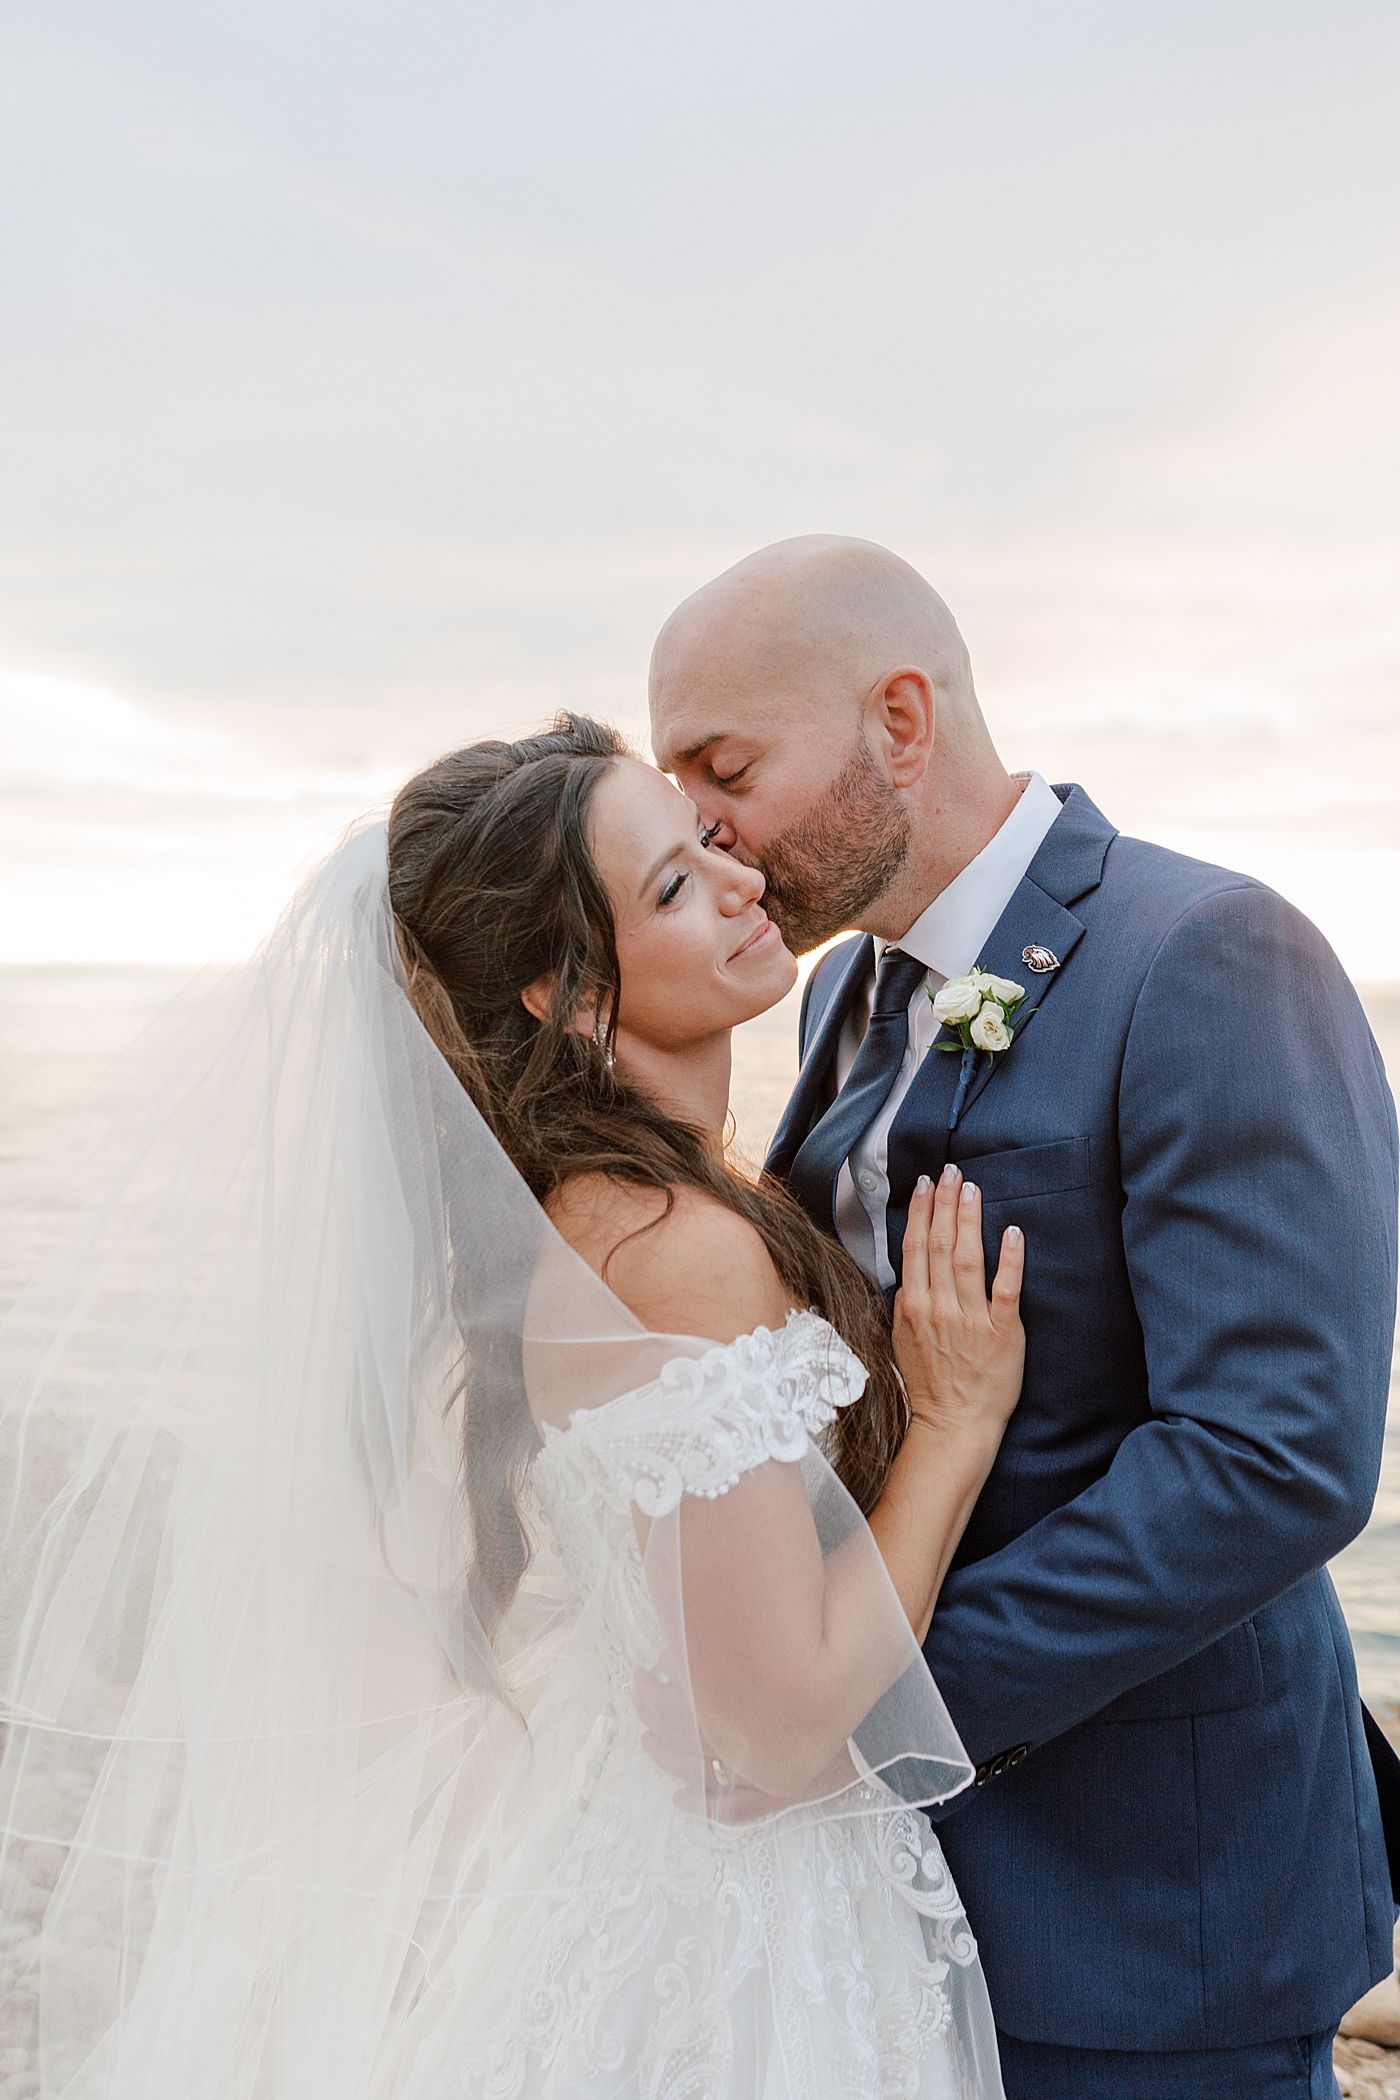 Close up of a groom in navy suit and bride in wedding dress holding each other with the groom kissing the bride on the cheek on a seaside path at sunset | Image by San Diego Wedding Photographer Hope Helmuth